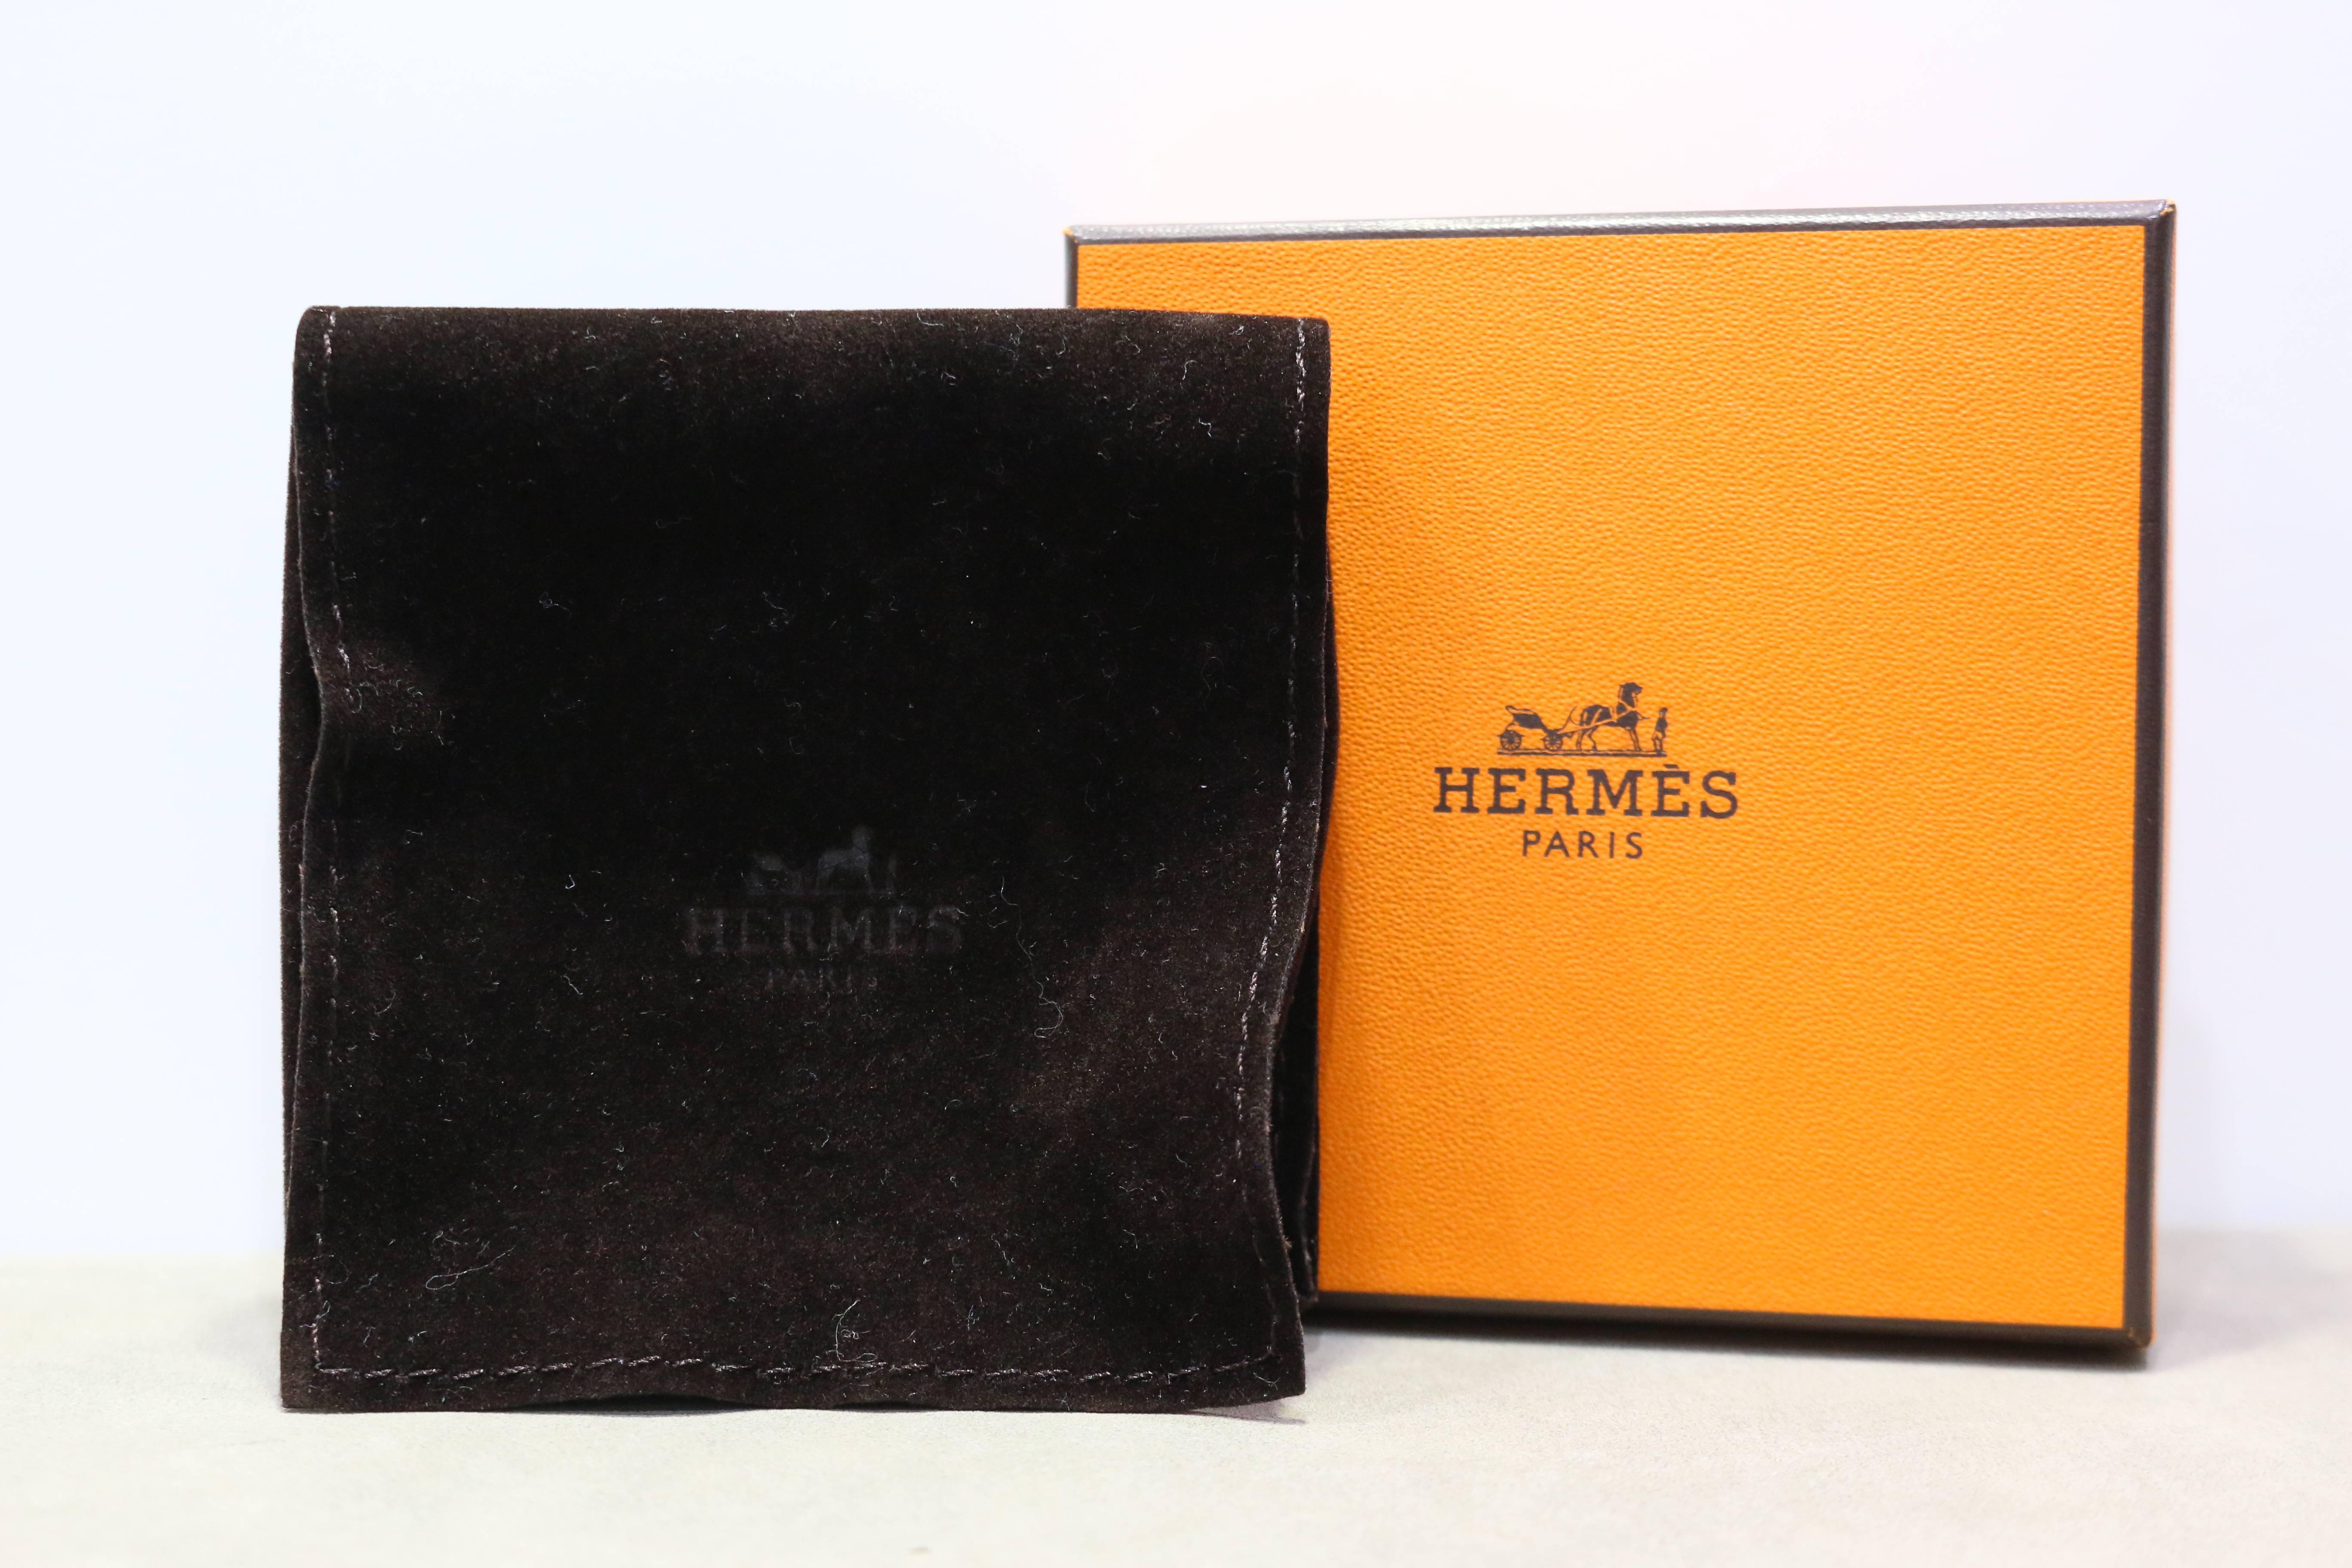 - Authentic and brand new Hermes orange Kelly double tour leather bracelet in silver toned hardware. It is a classic leather bracelet with a sense of chicness! 

- Made in France. 

- Measurement: 37.5 cm 

- It comes with dust bag and original box.